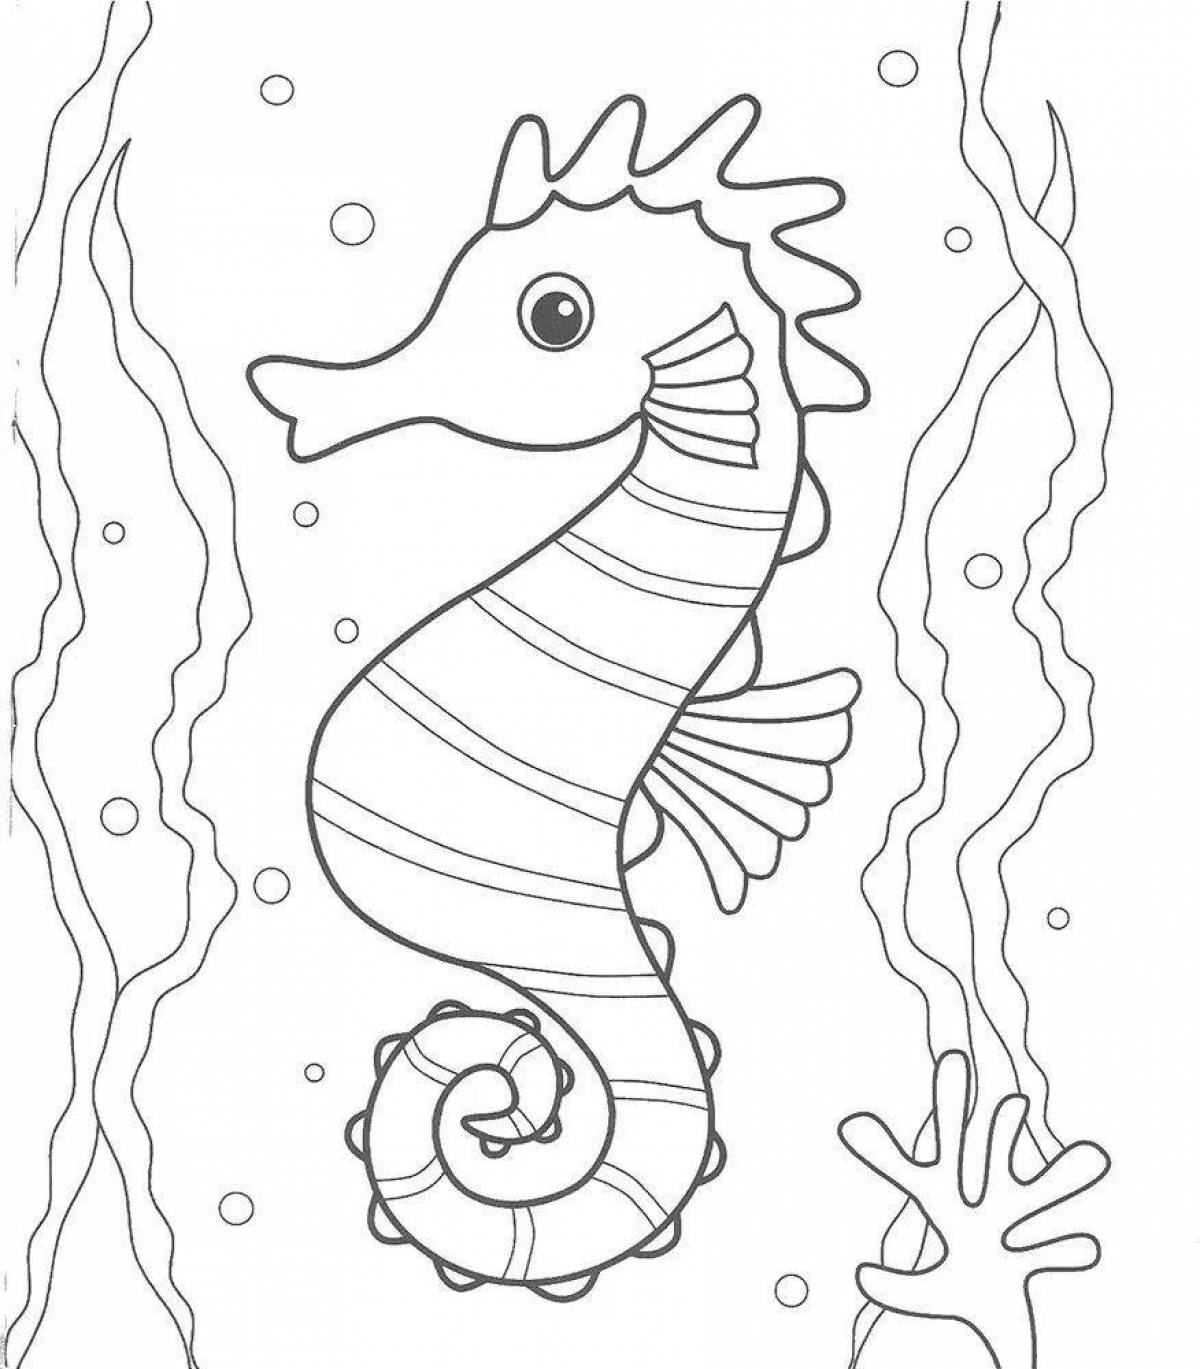 Fancy sea animals coloring pages for kids